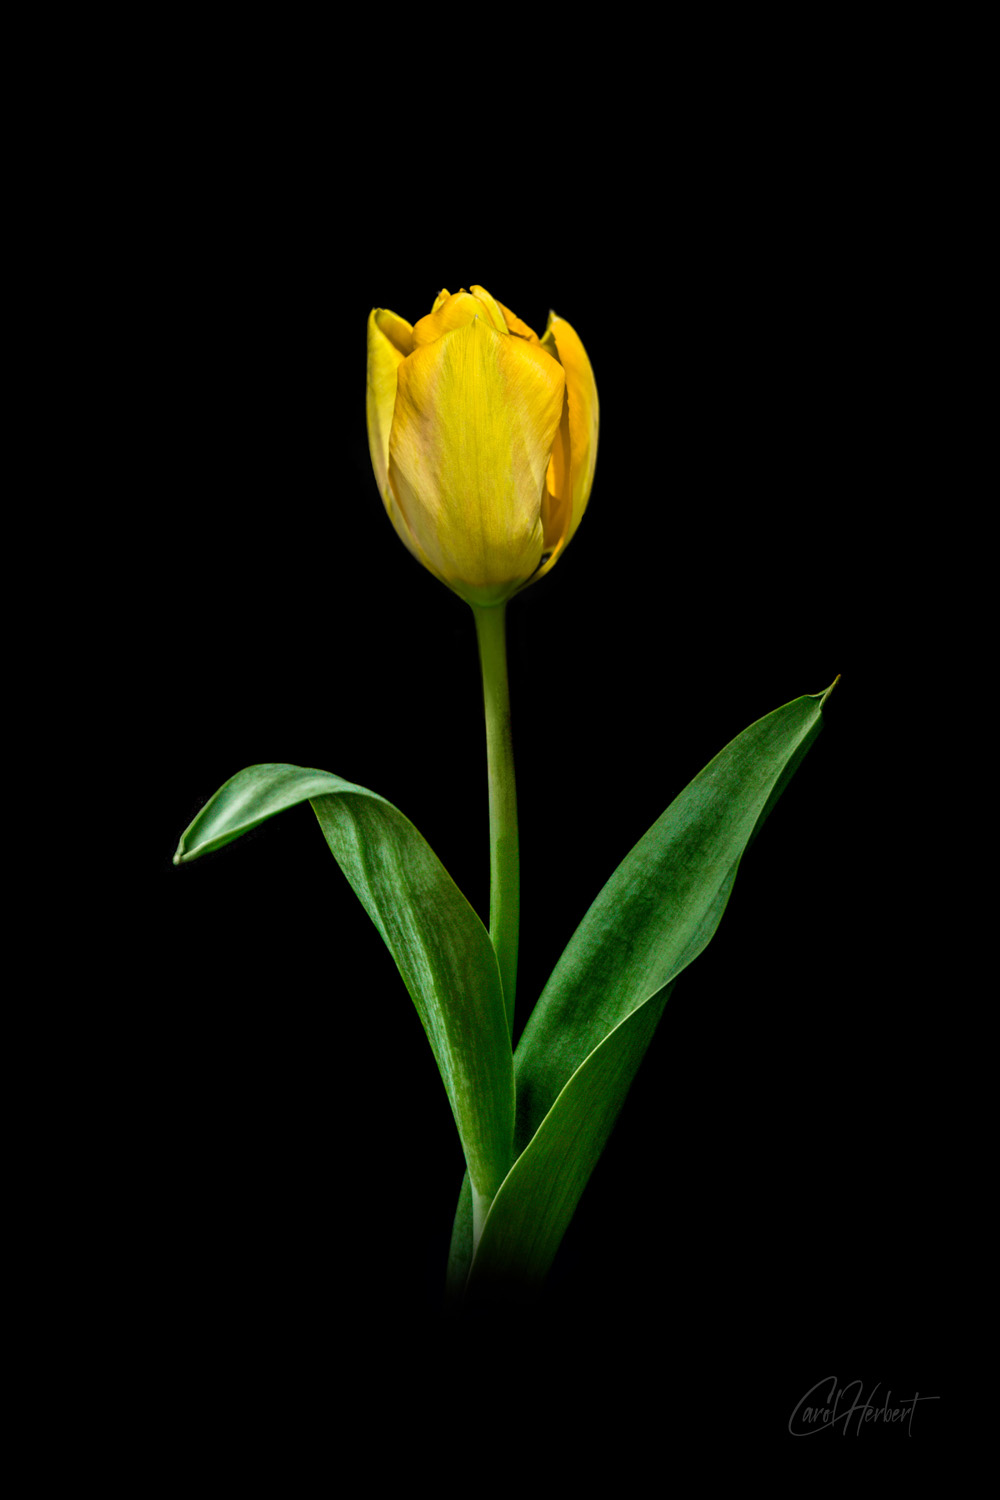 A single yellow tulip on a black background